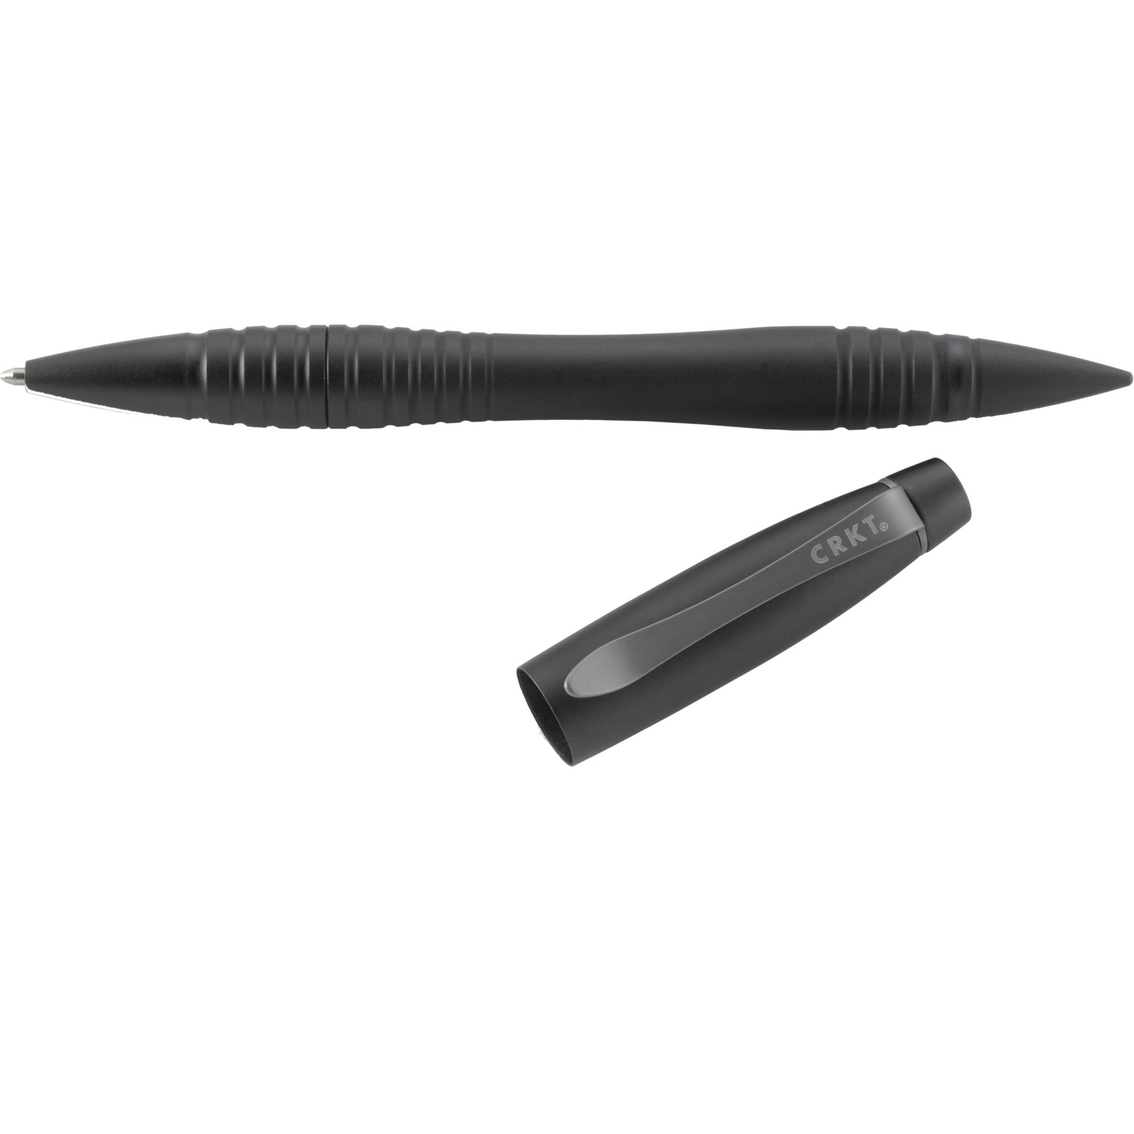 Columbia River Knife & Tool Williams Tactical Pen - Image 2 of 4